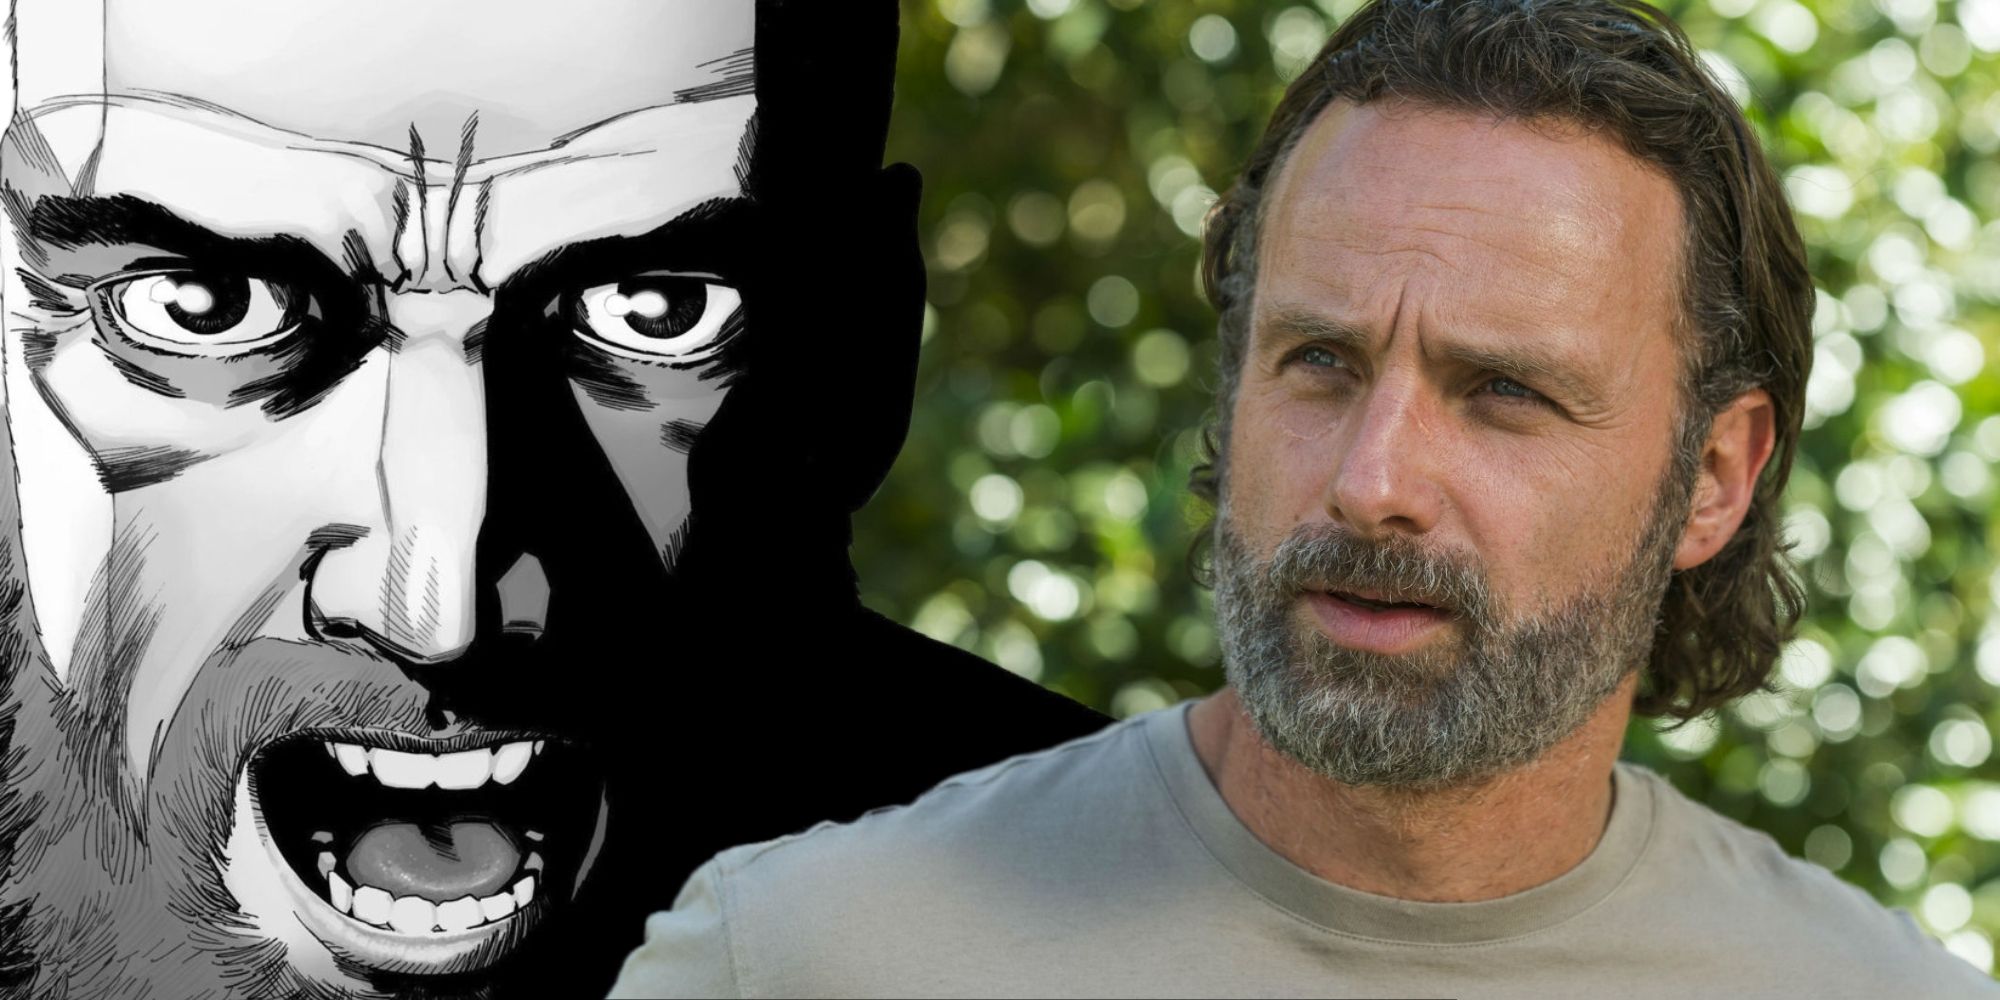 Rick Grimes in Robert Kirkman's The Walking Dead comic and portrayed by Andrew Lincoln in the TV show